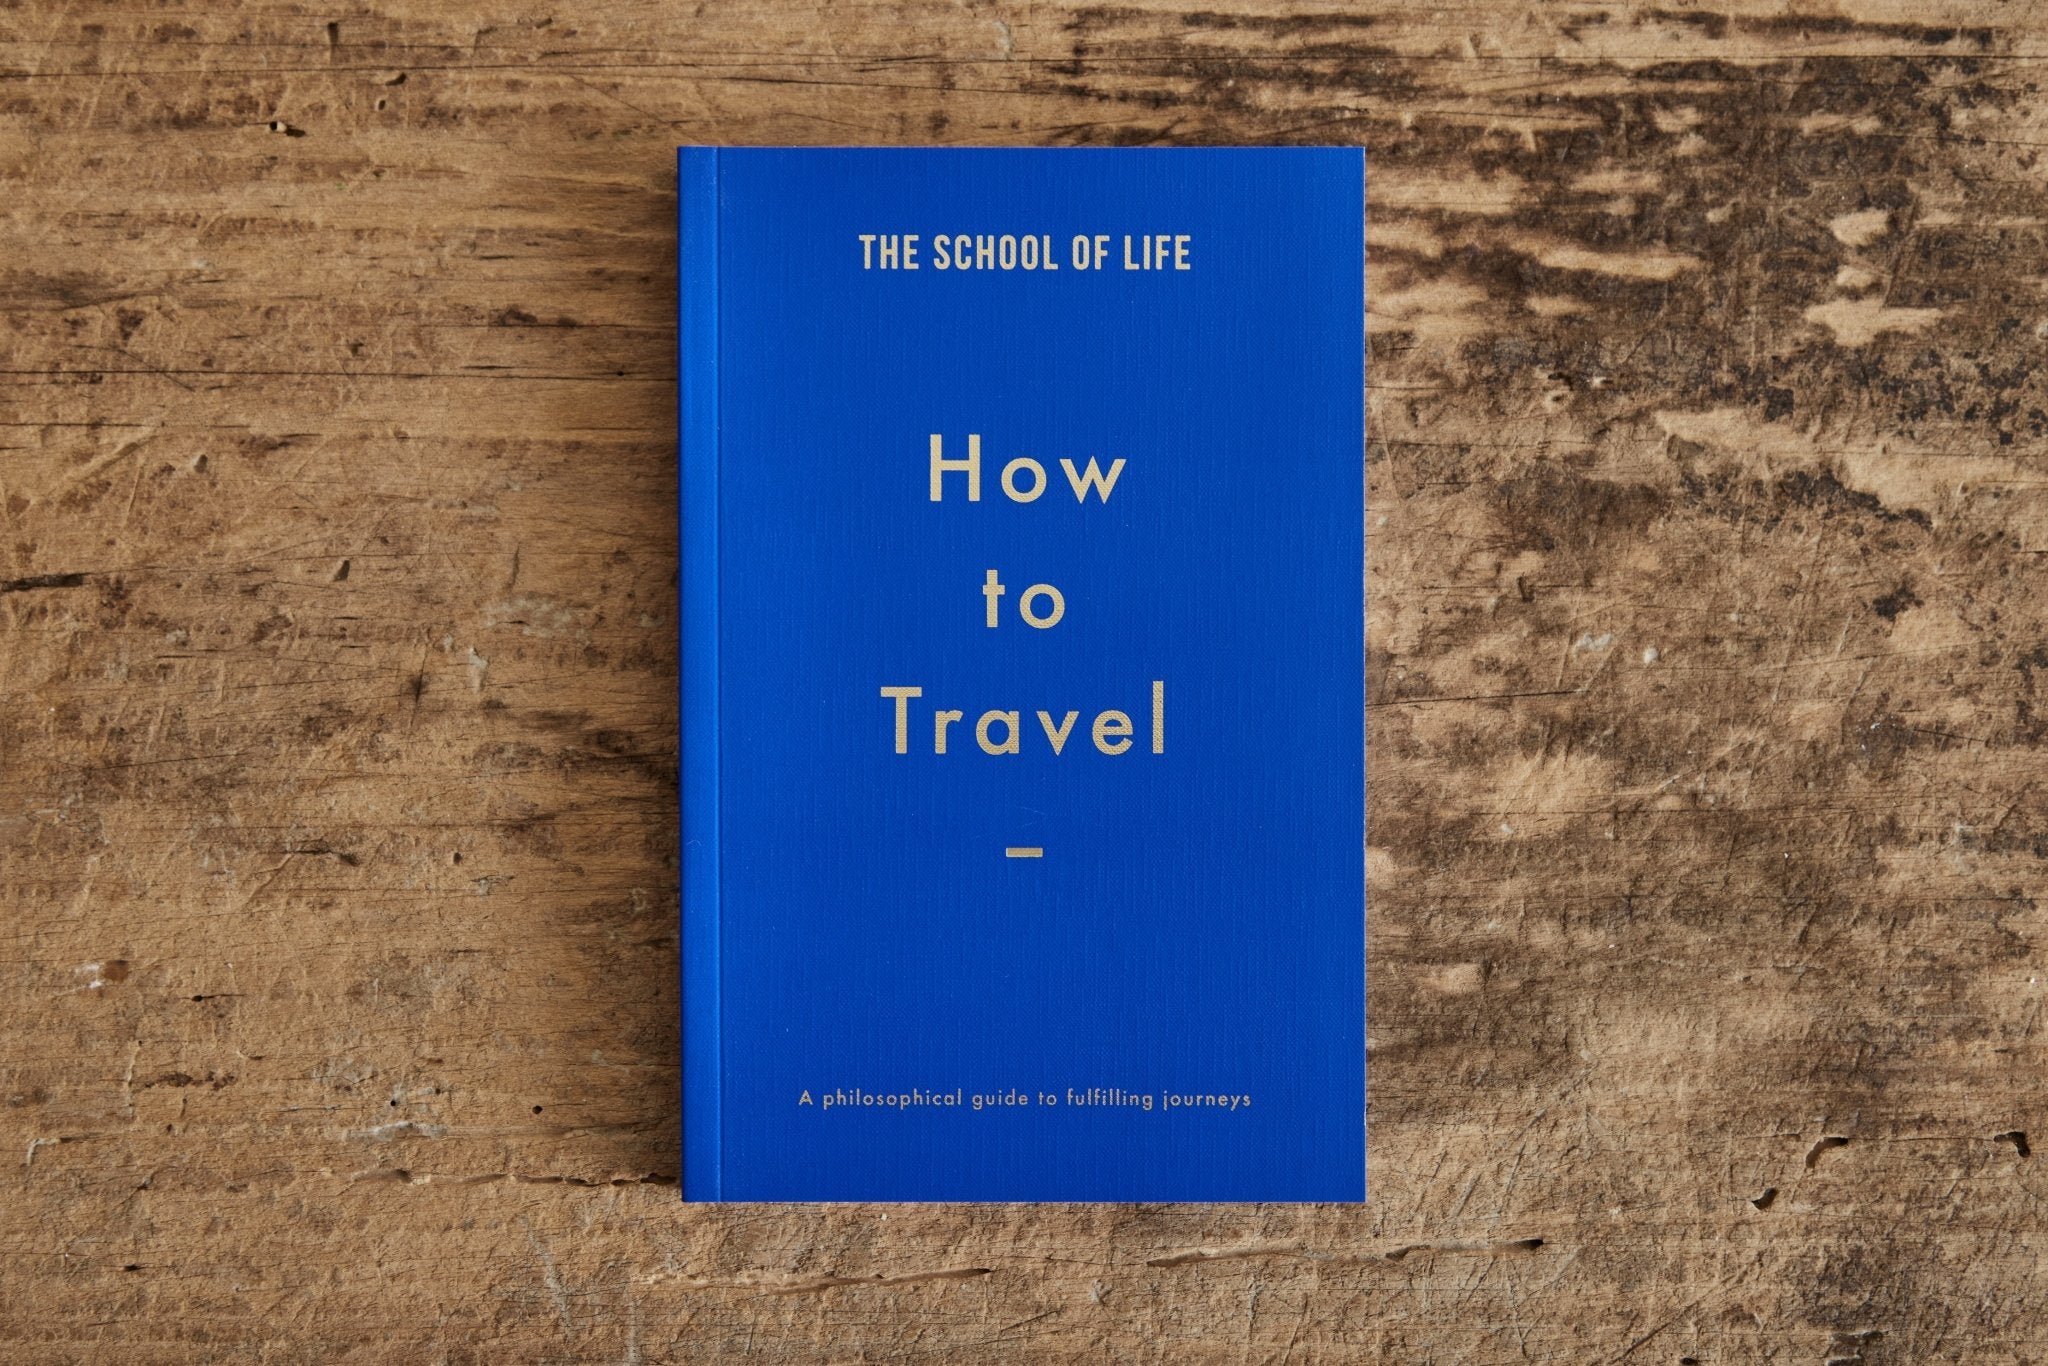 How to Travel by The School of life, Alain de Botton - Nickey Kehoe